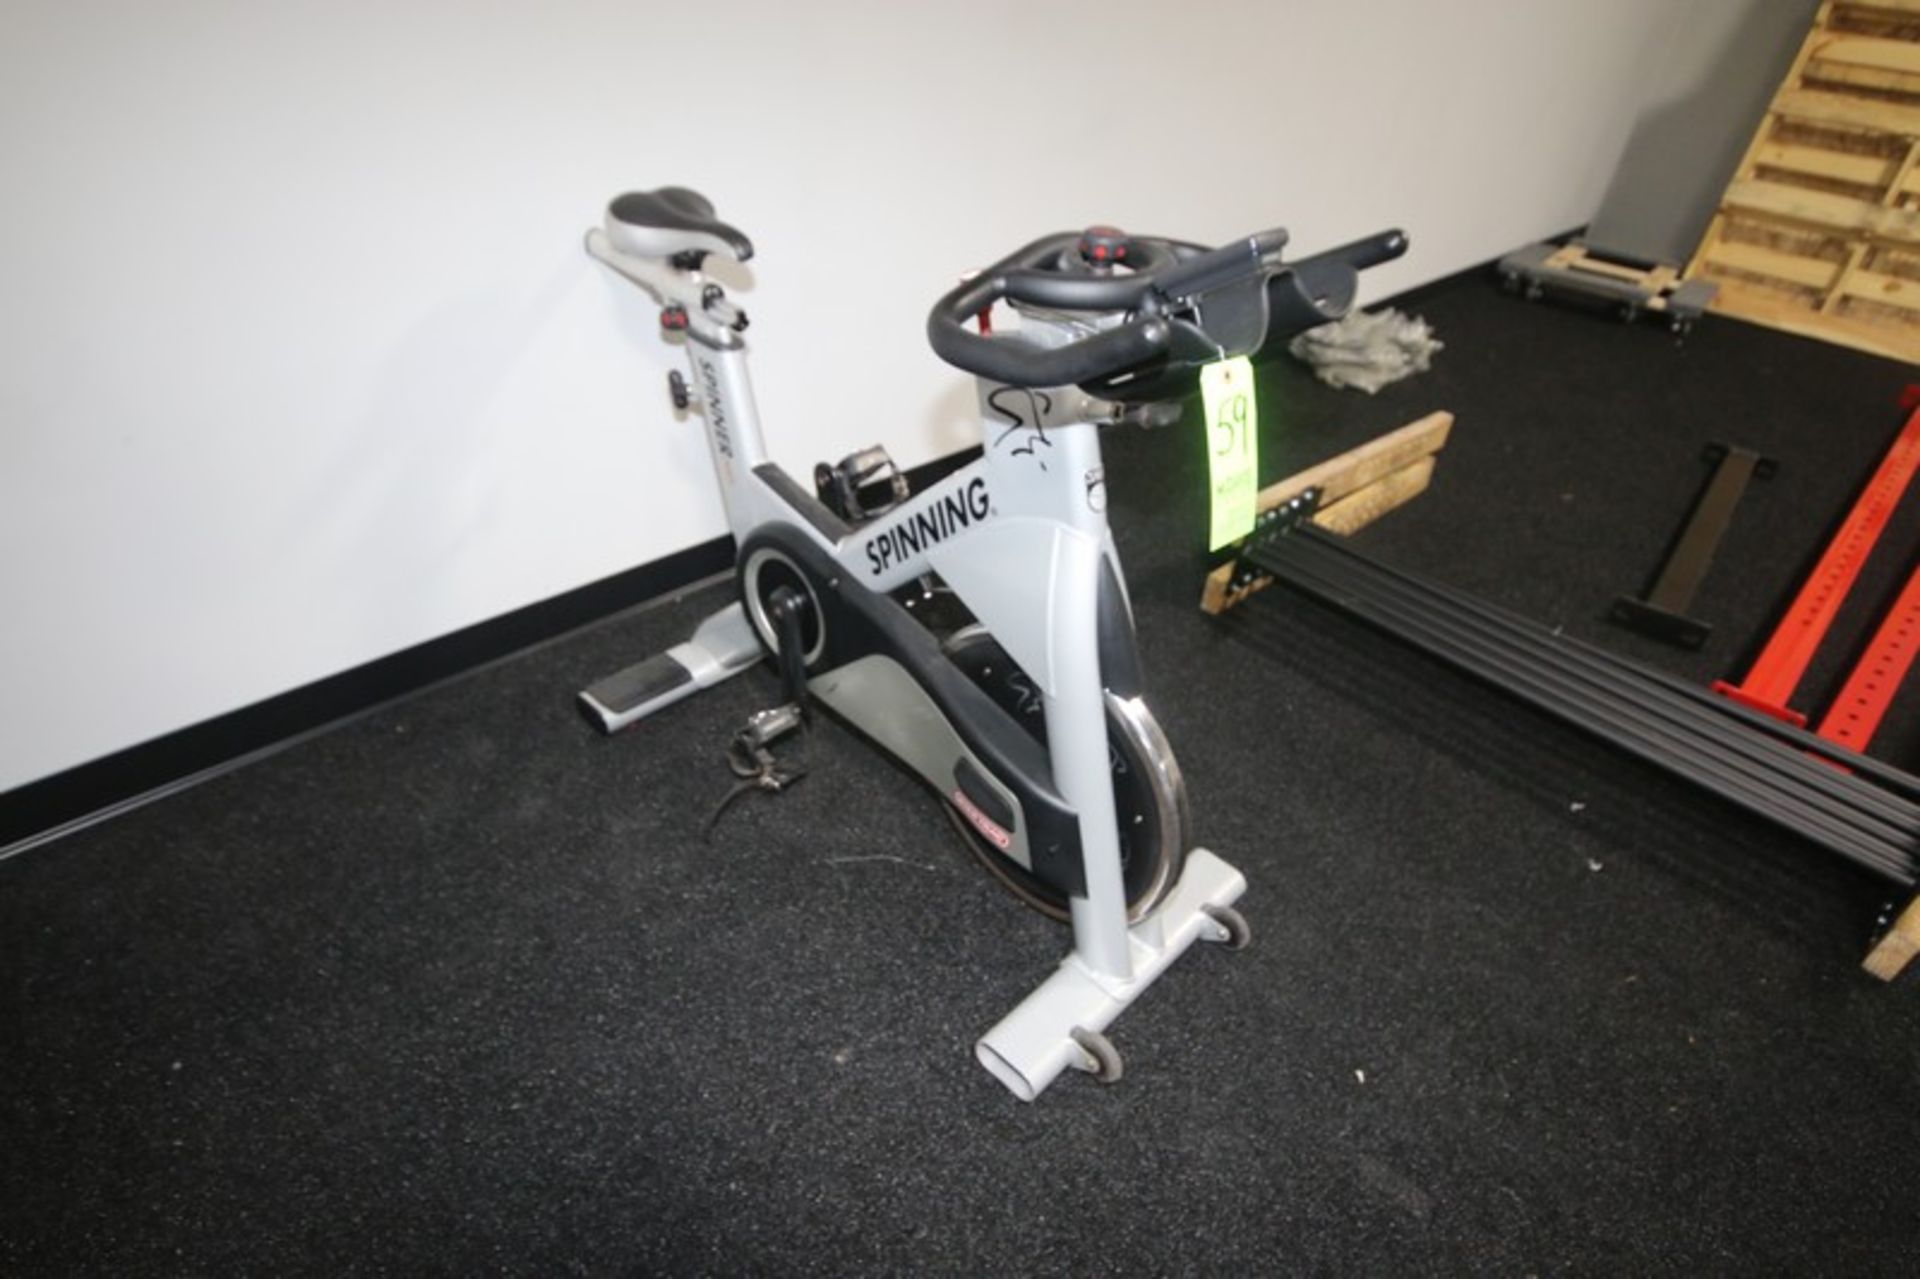 Spinner NXT Spin Bike (LOCATED @ 2806 GOLDEN MILE HWY, ROUTE 286, PITTSBURGH, PA 15239)